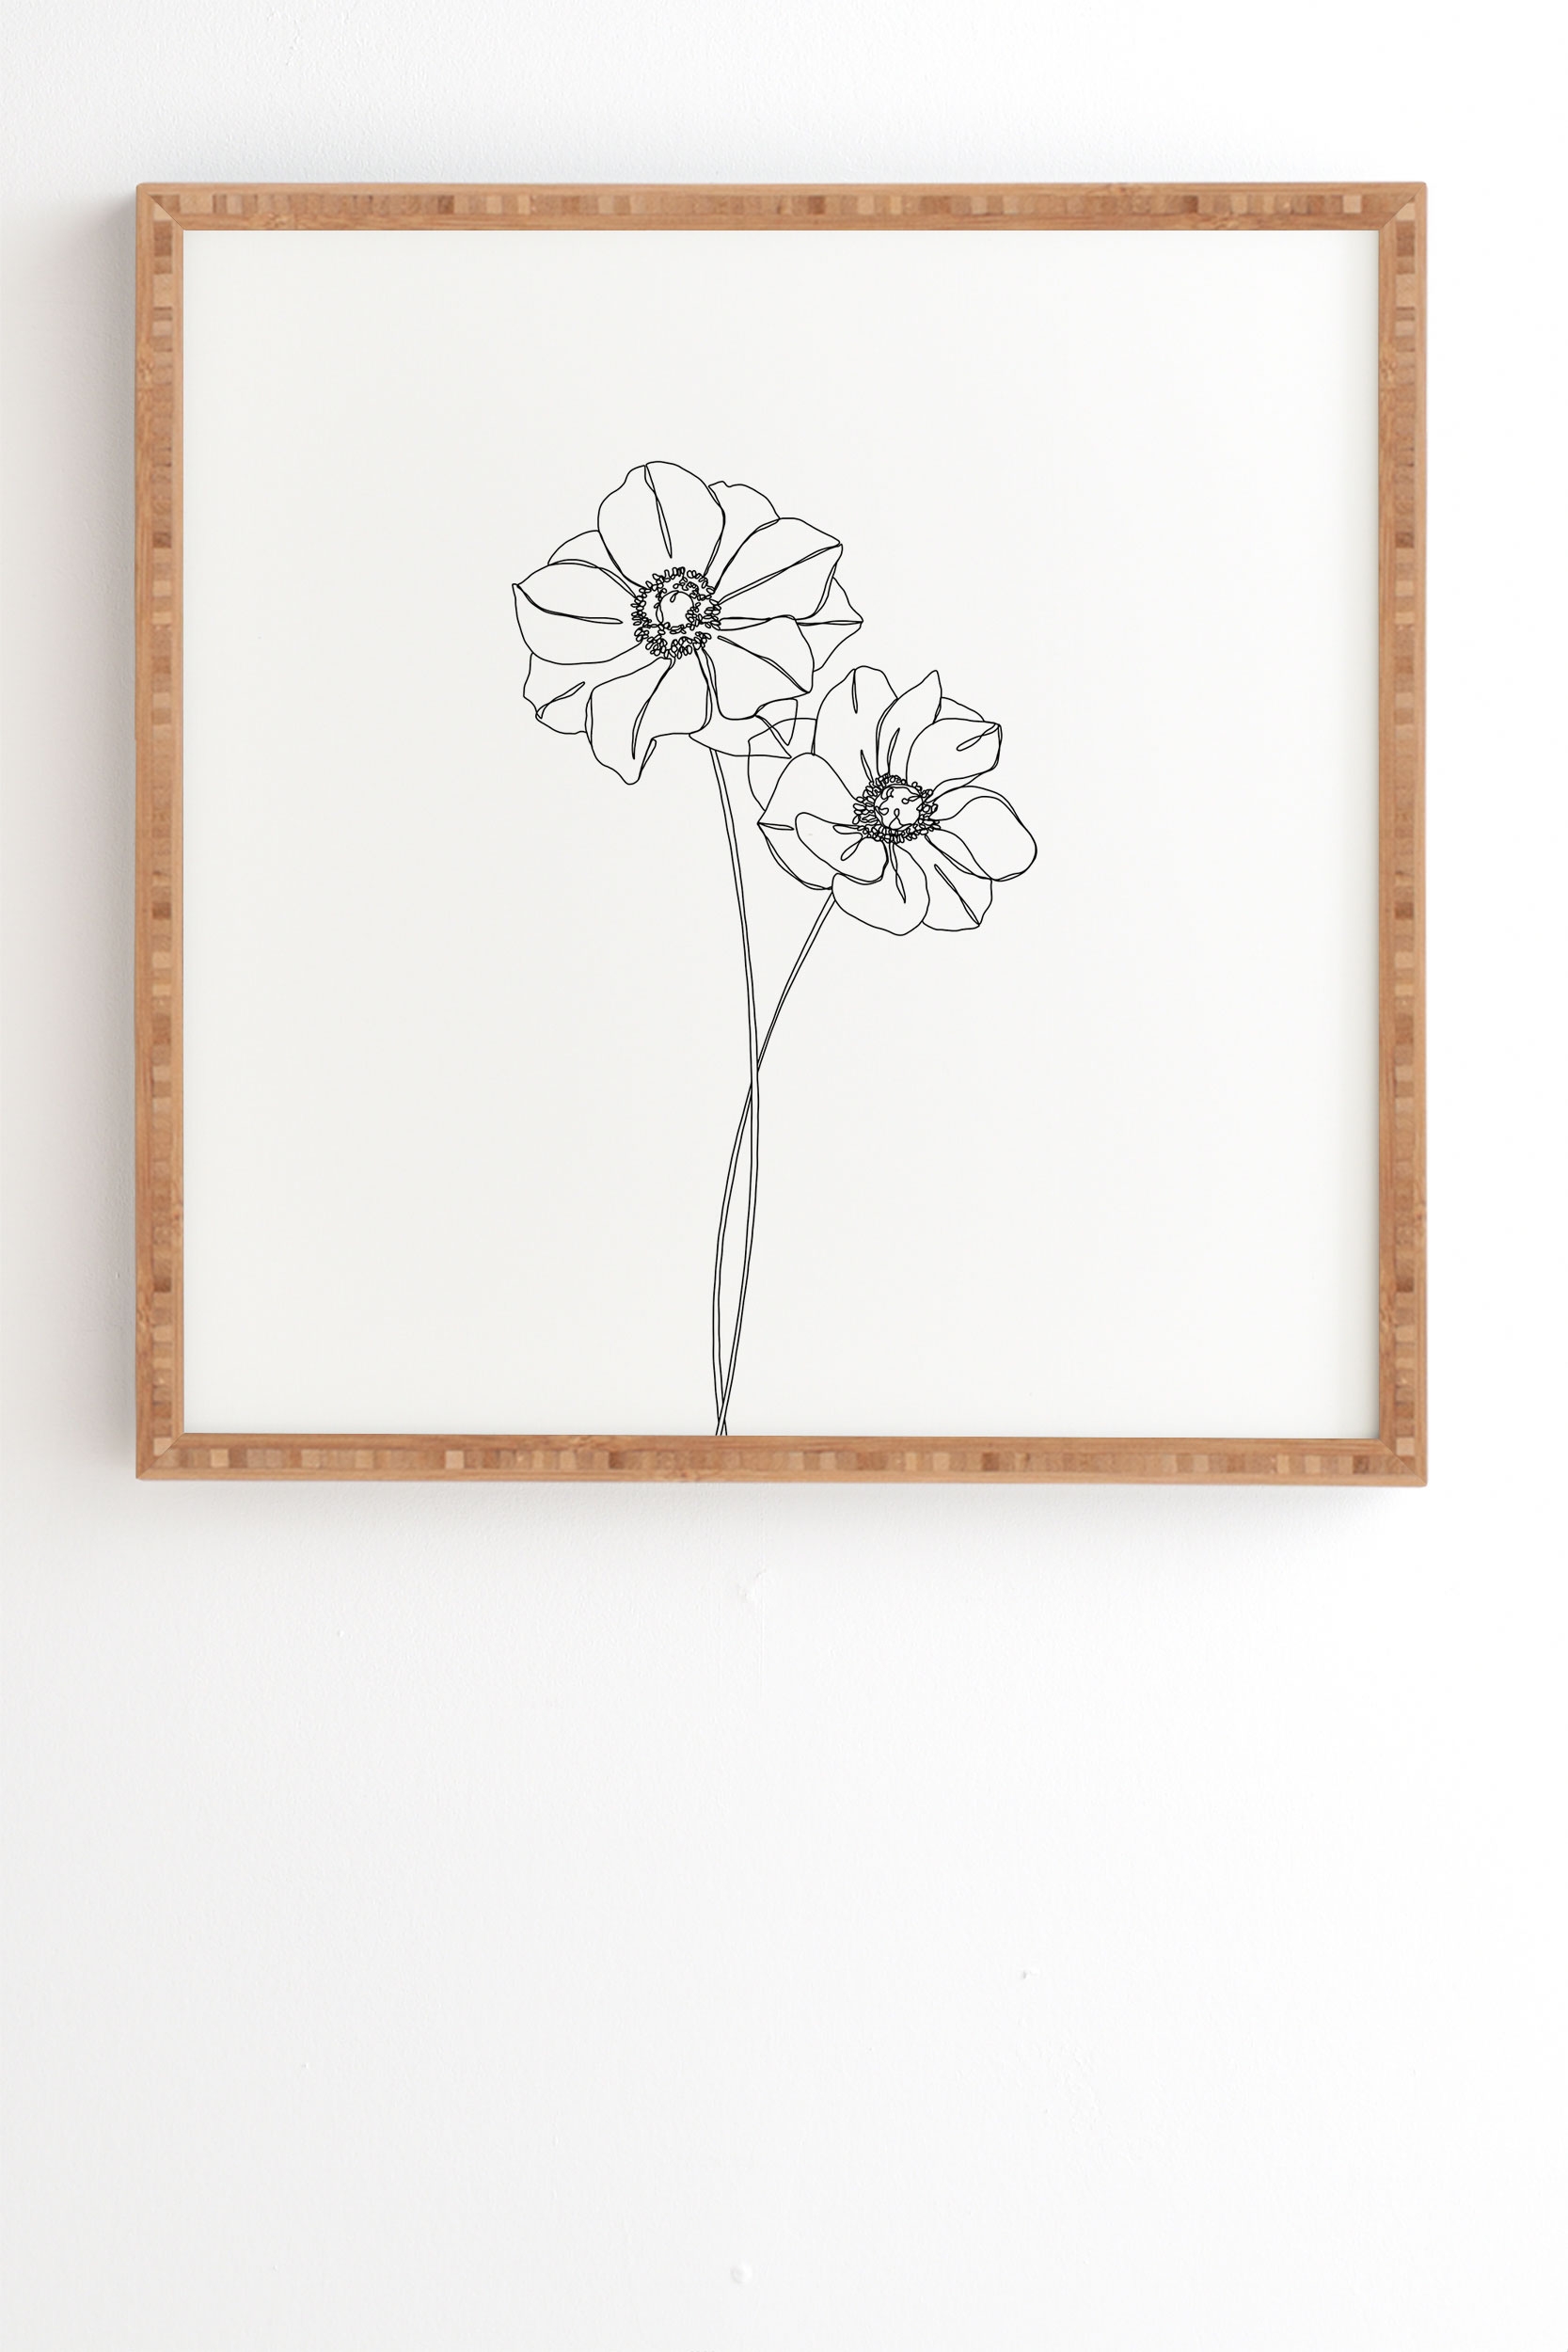 Anemones By The Colour Study by The Colour Study - Framed Wall Art Bamboo 8" x 9.5" - Image 1